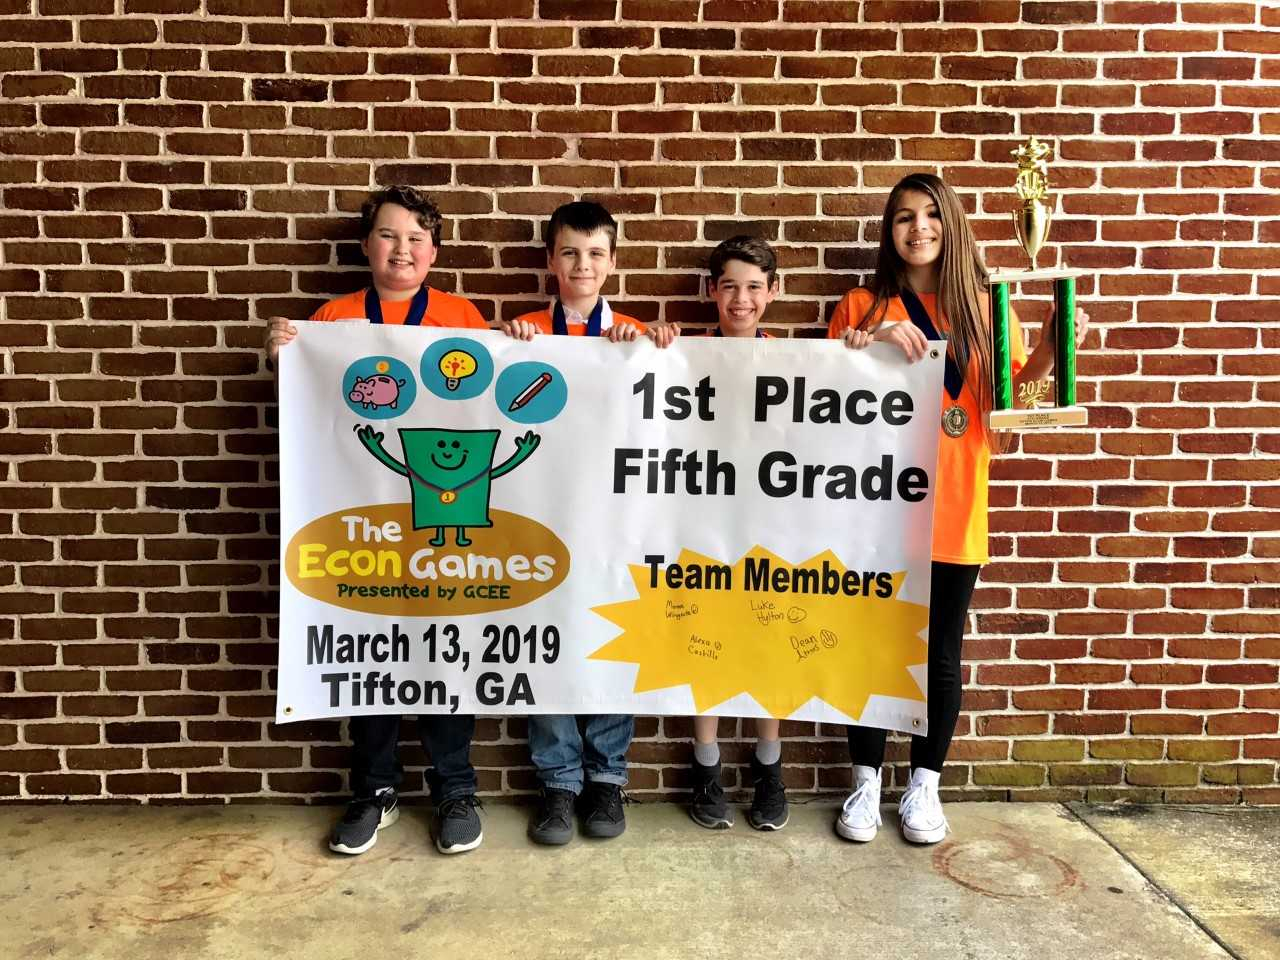 kids holding banner and trophy